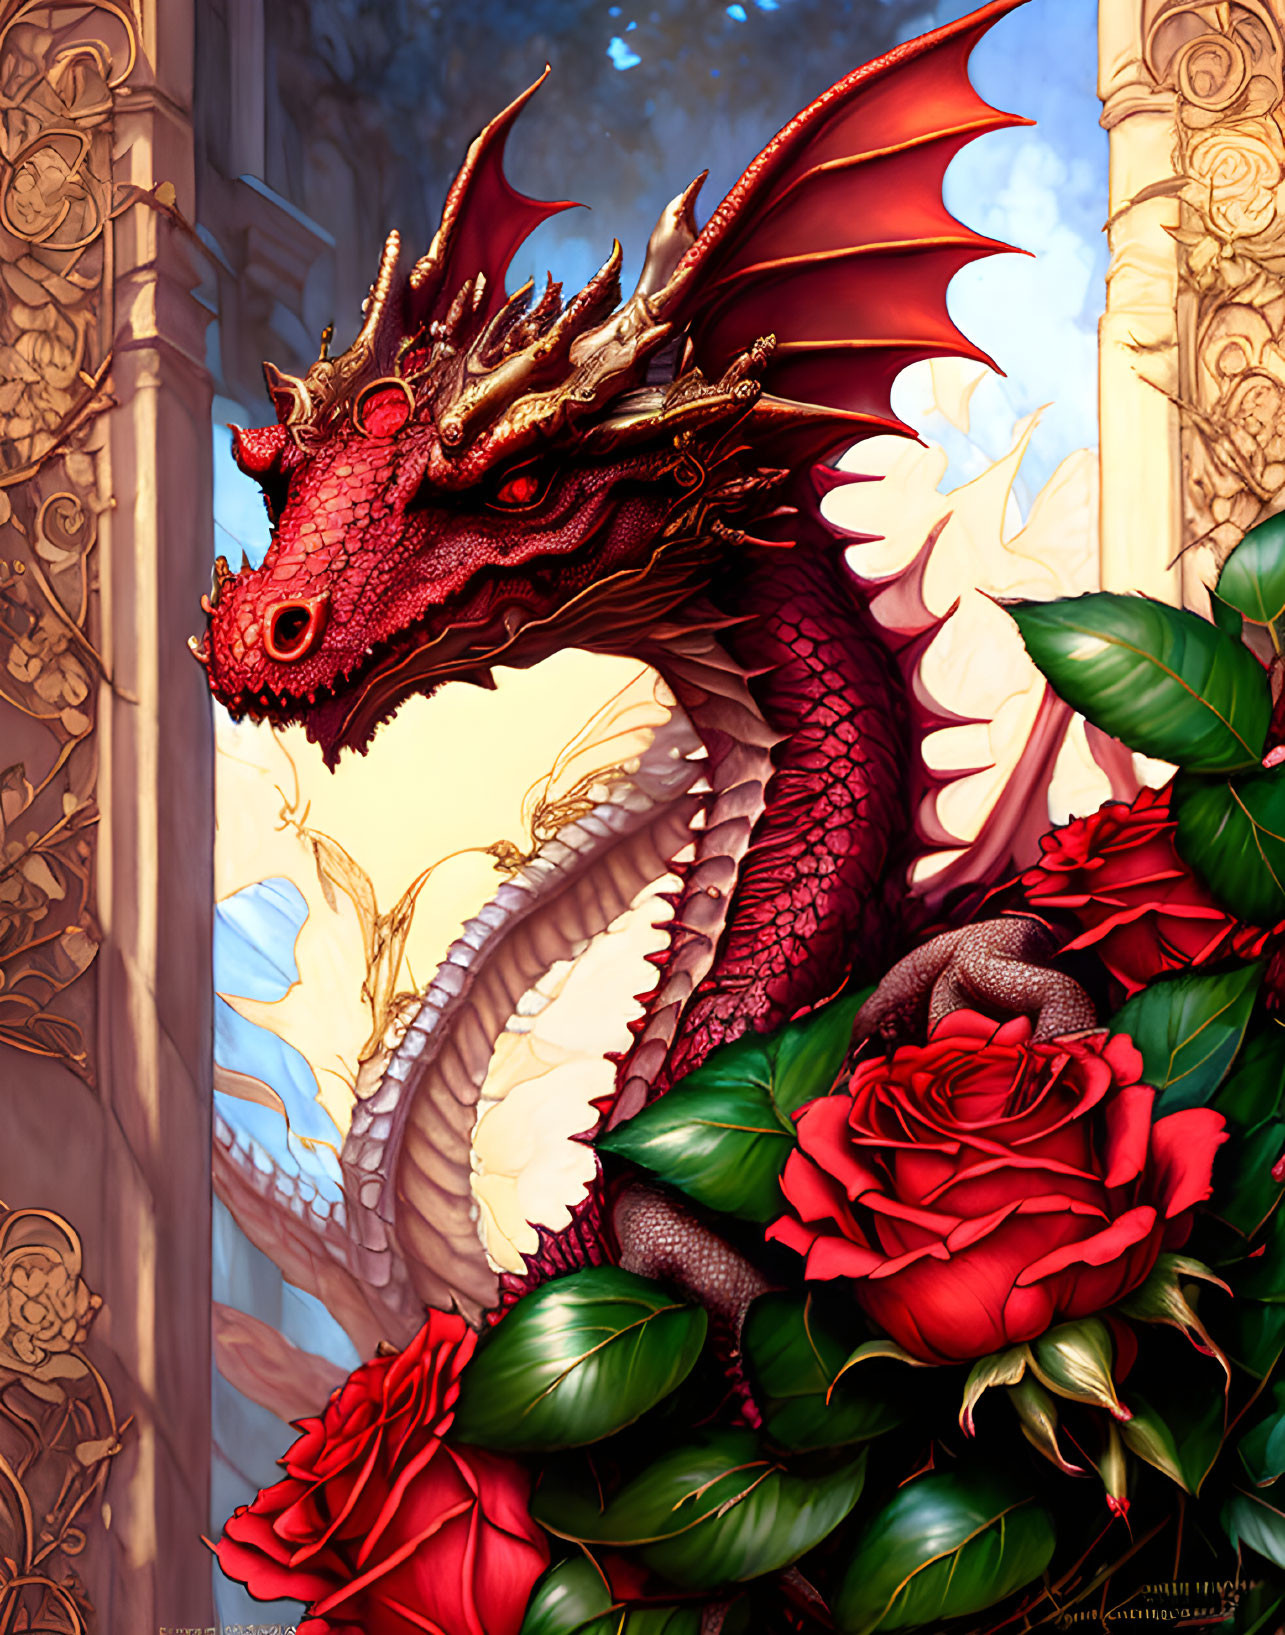 Red Dragon with Golden Horns and Eyes Surrounded by Blooming Roses and Stone Pillars